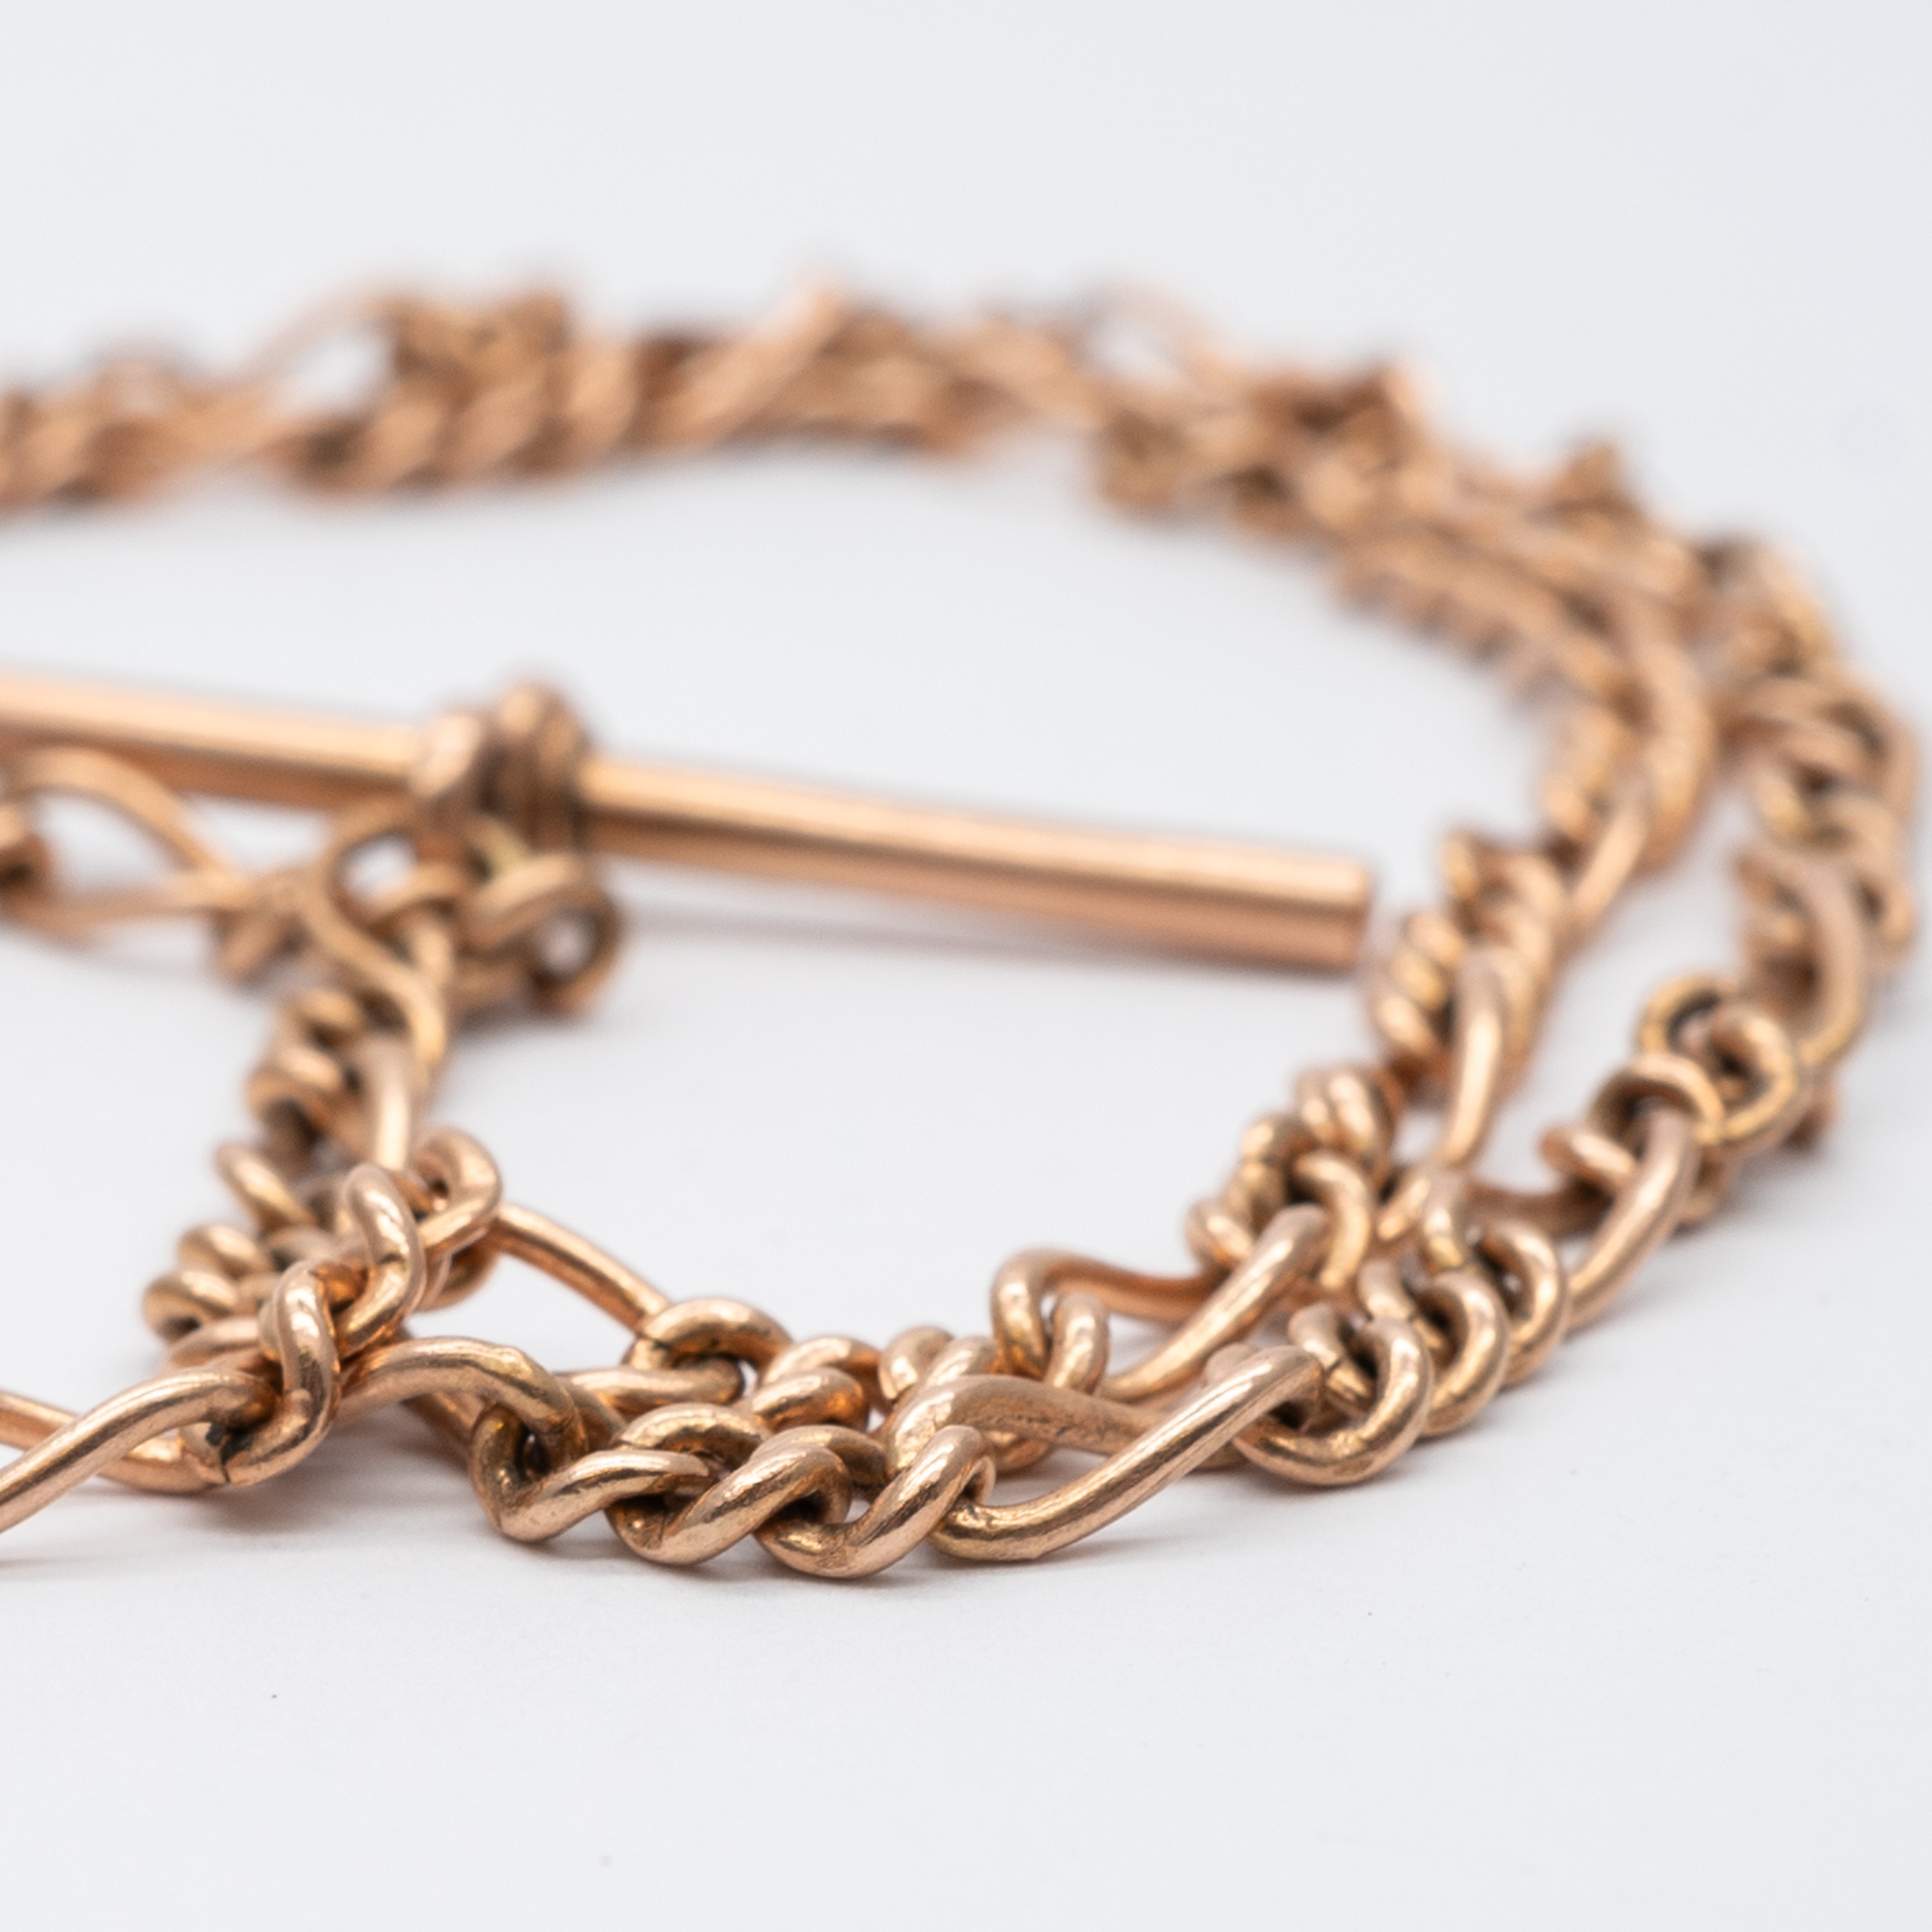 A 9ct rose gold solid linked albert chain - Image 2 of 4